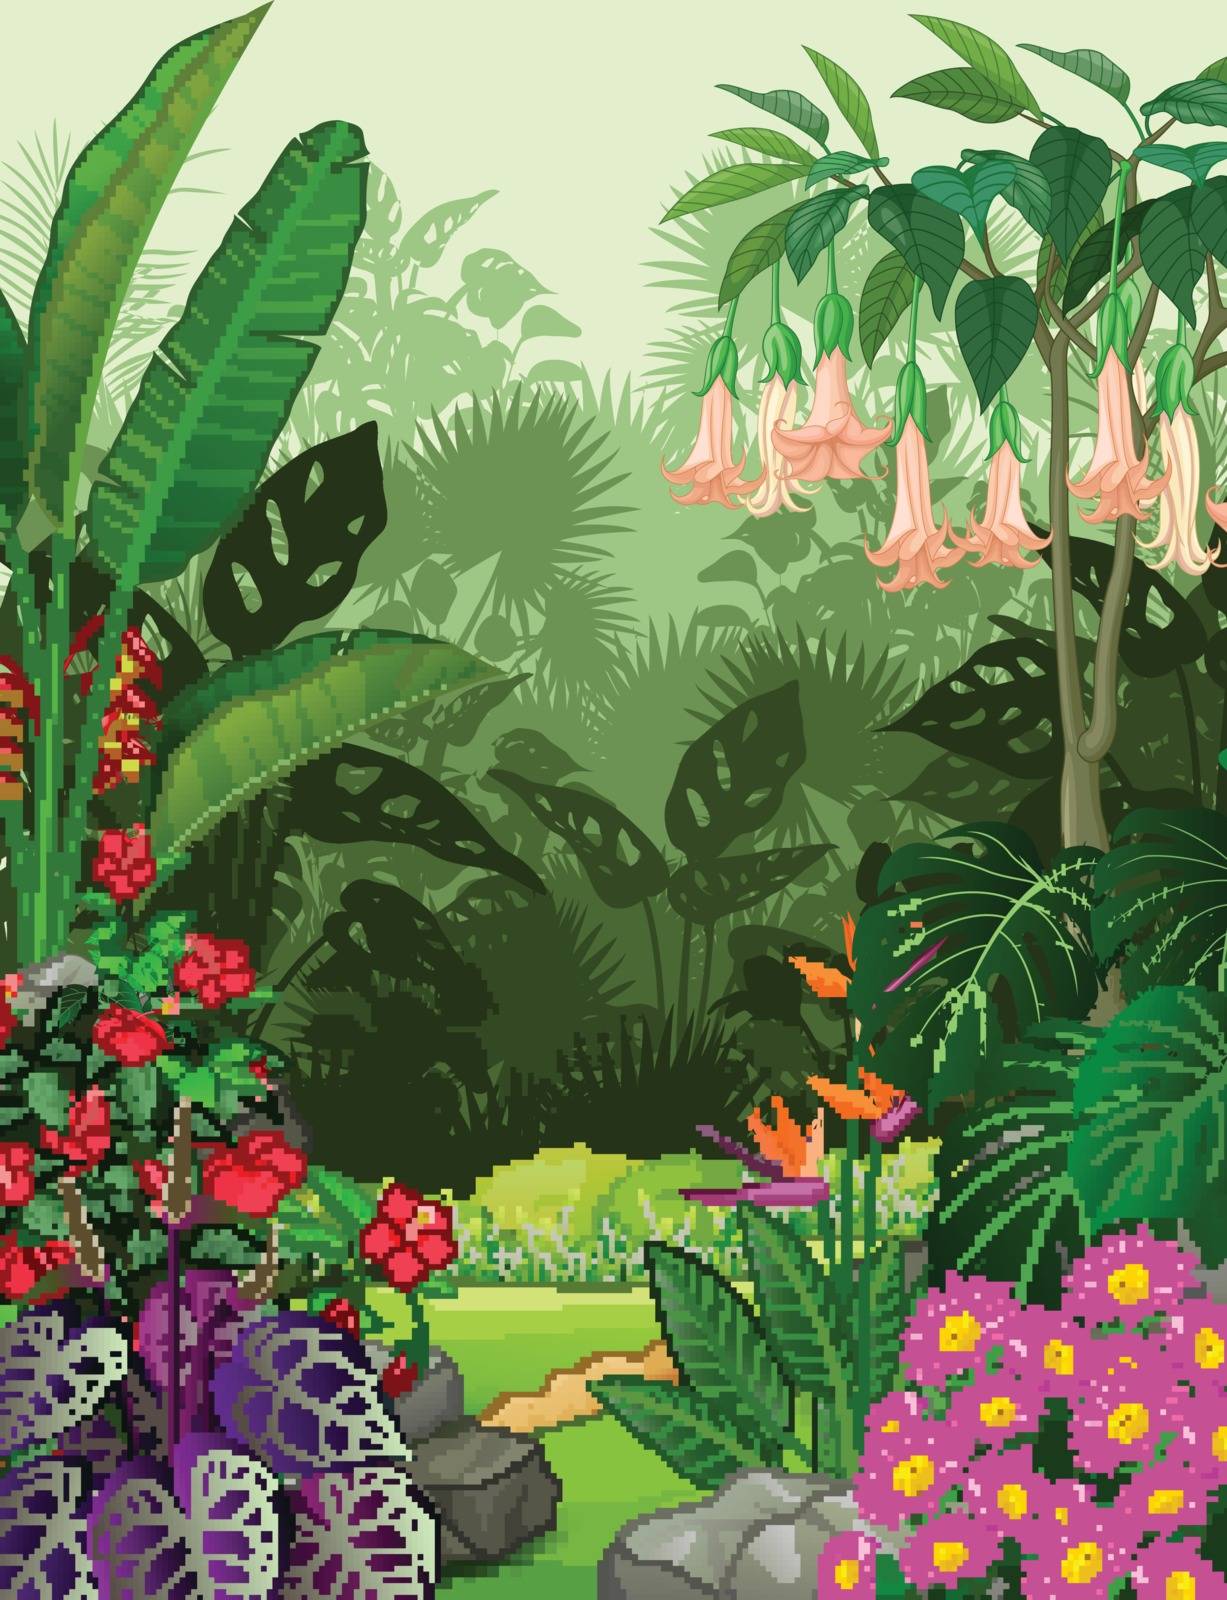 Landscape Dense Forest View With Tropical Plants and Flowers Cartoon Vector Illustration